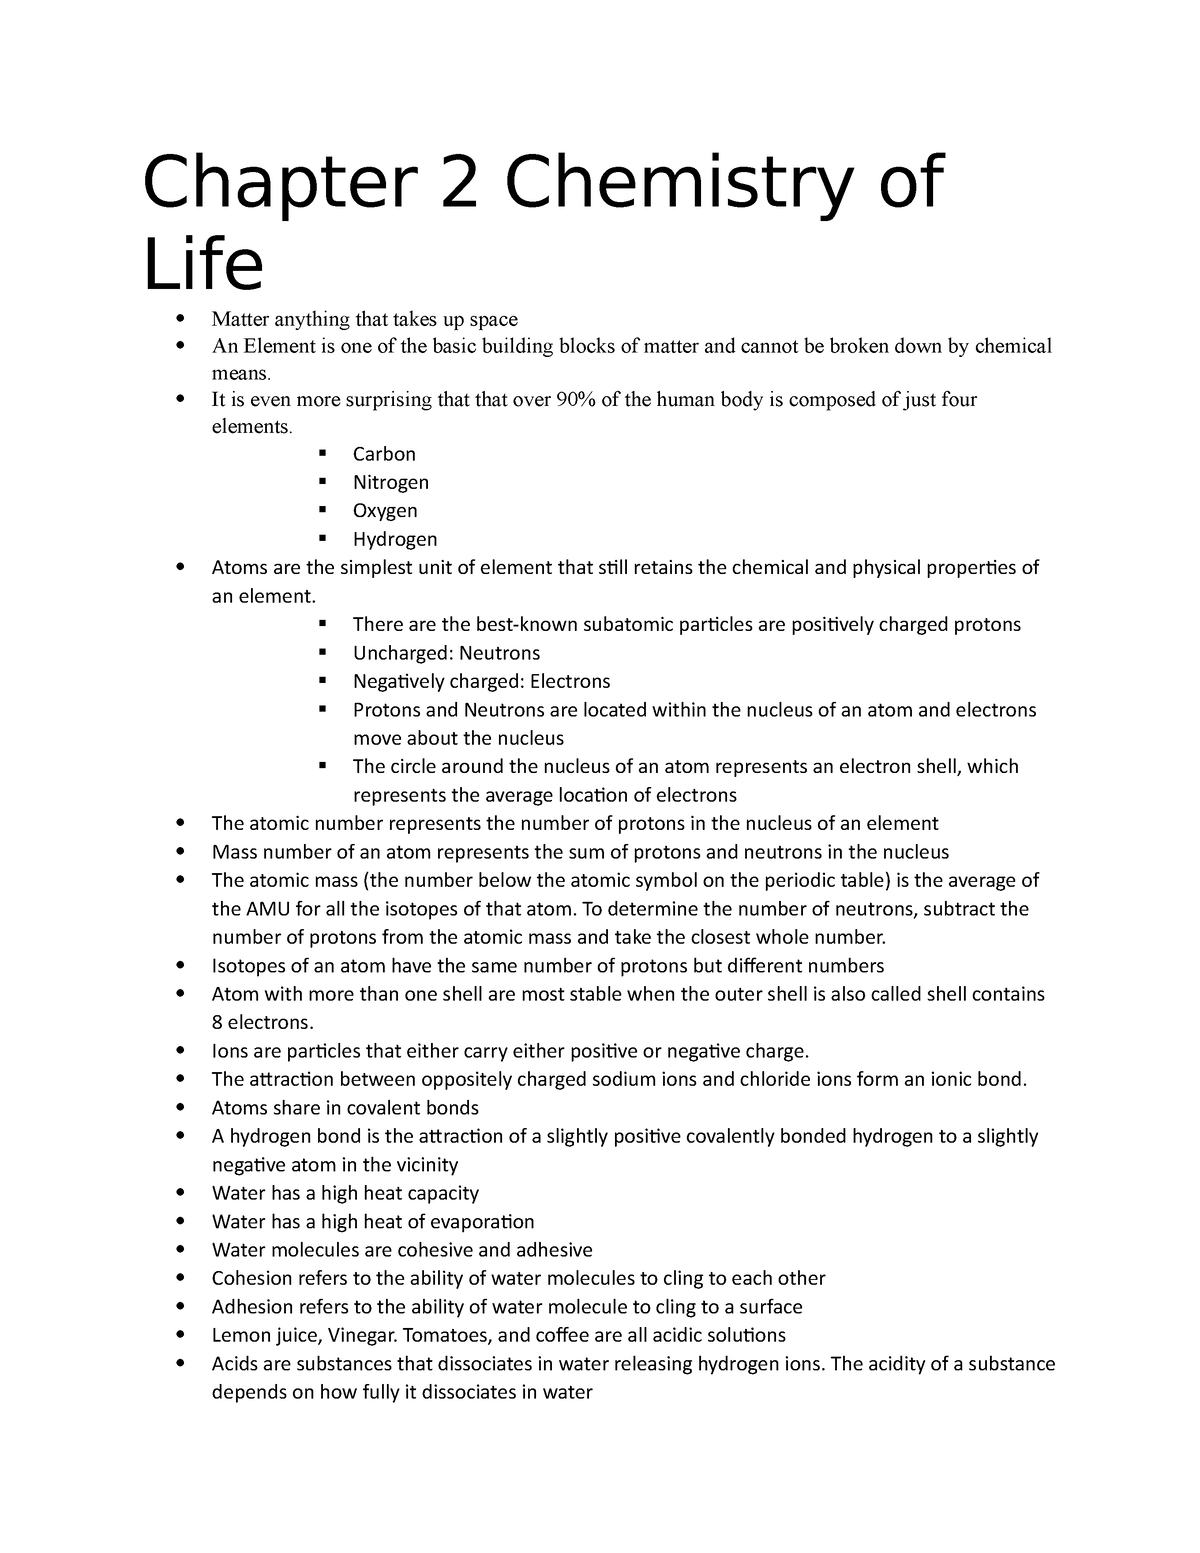 assignment term 2 chemistry of life